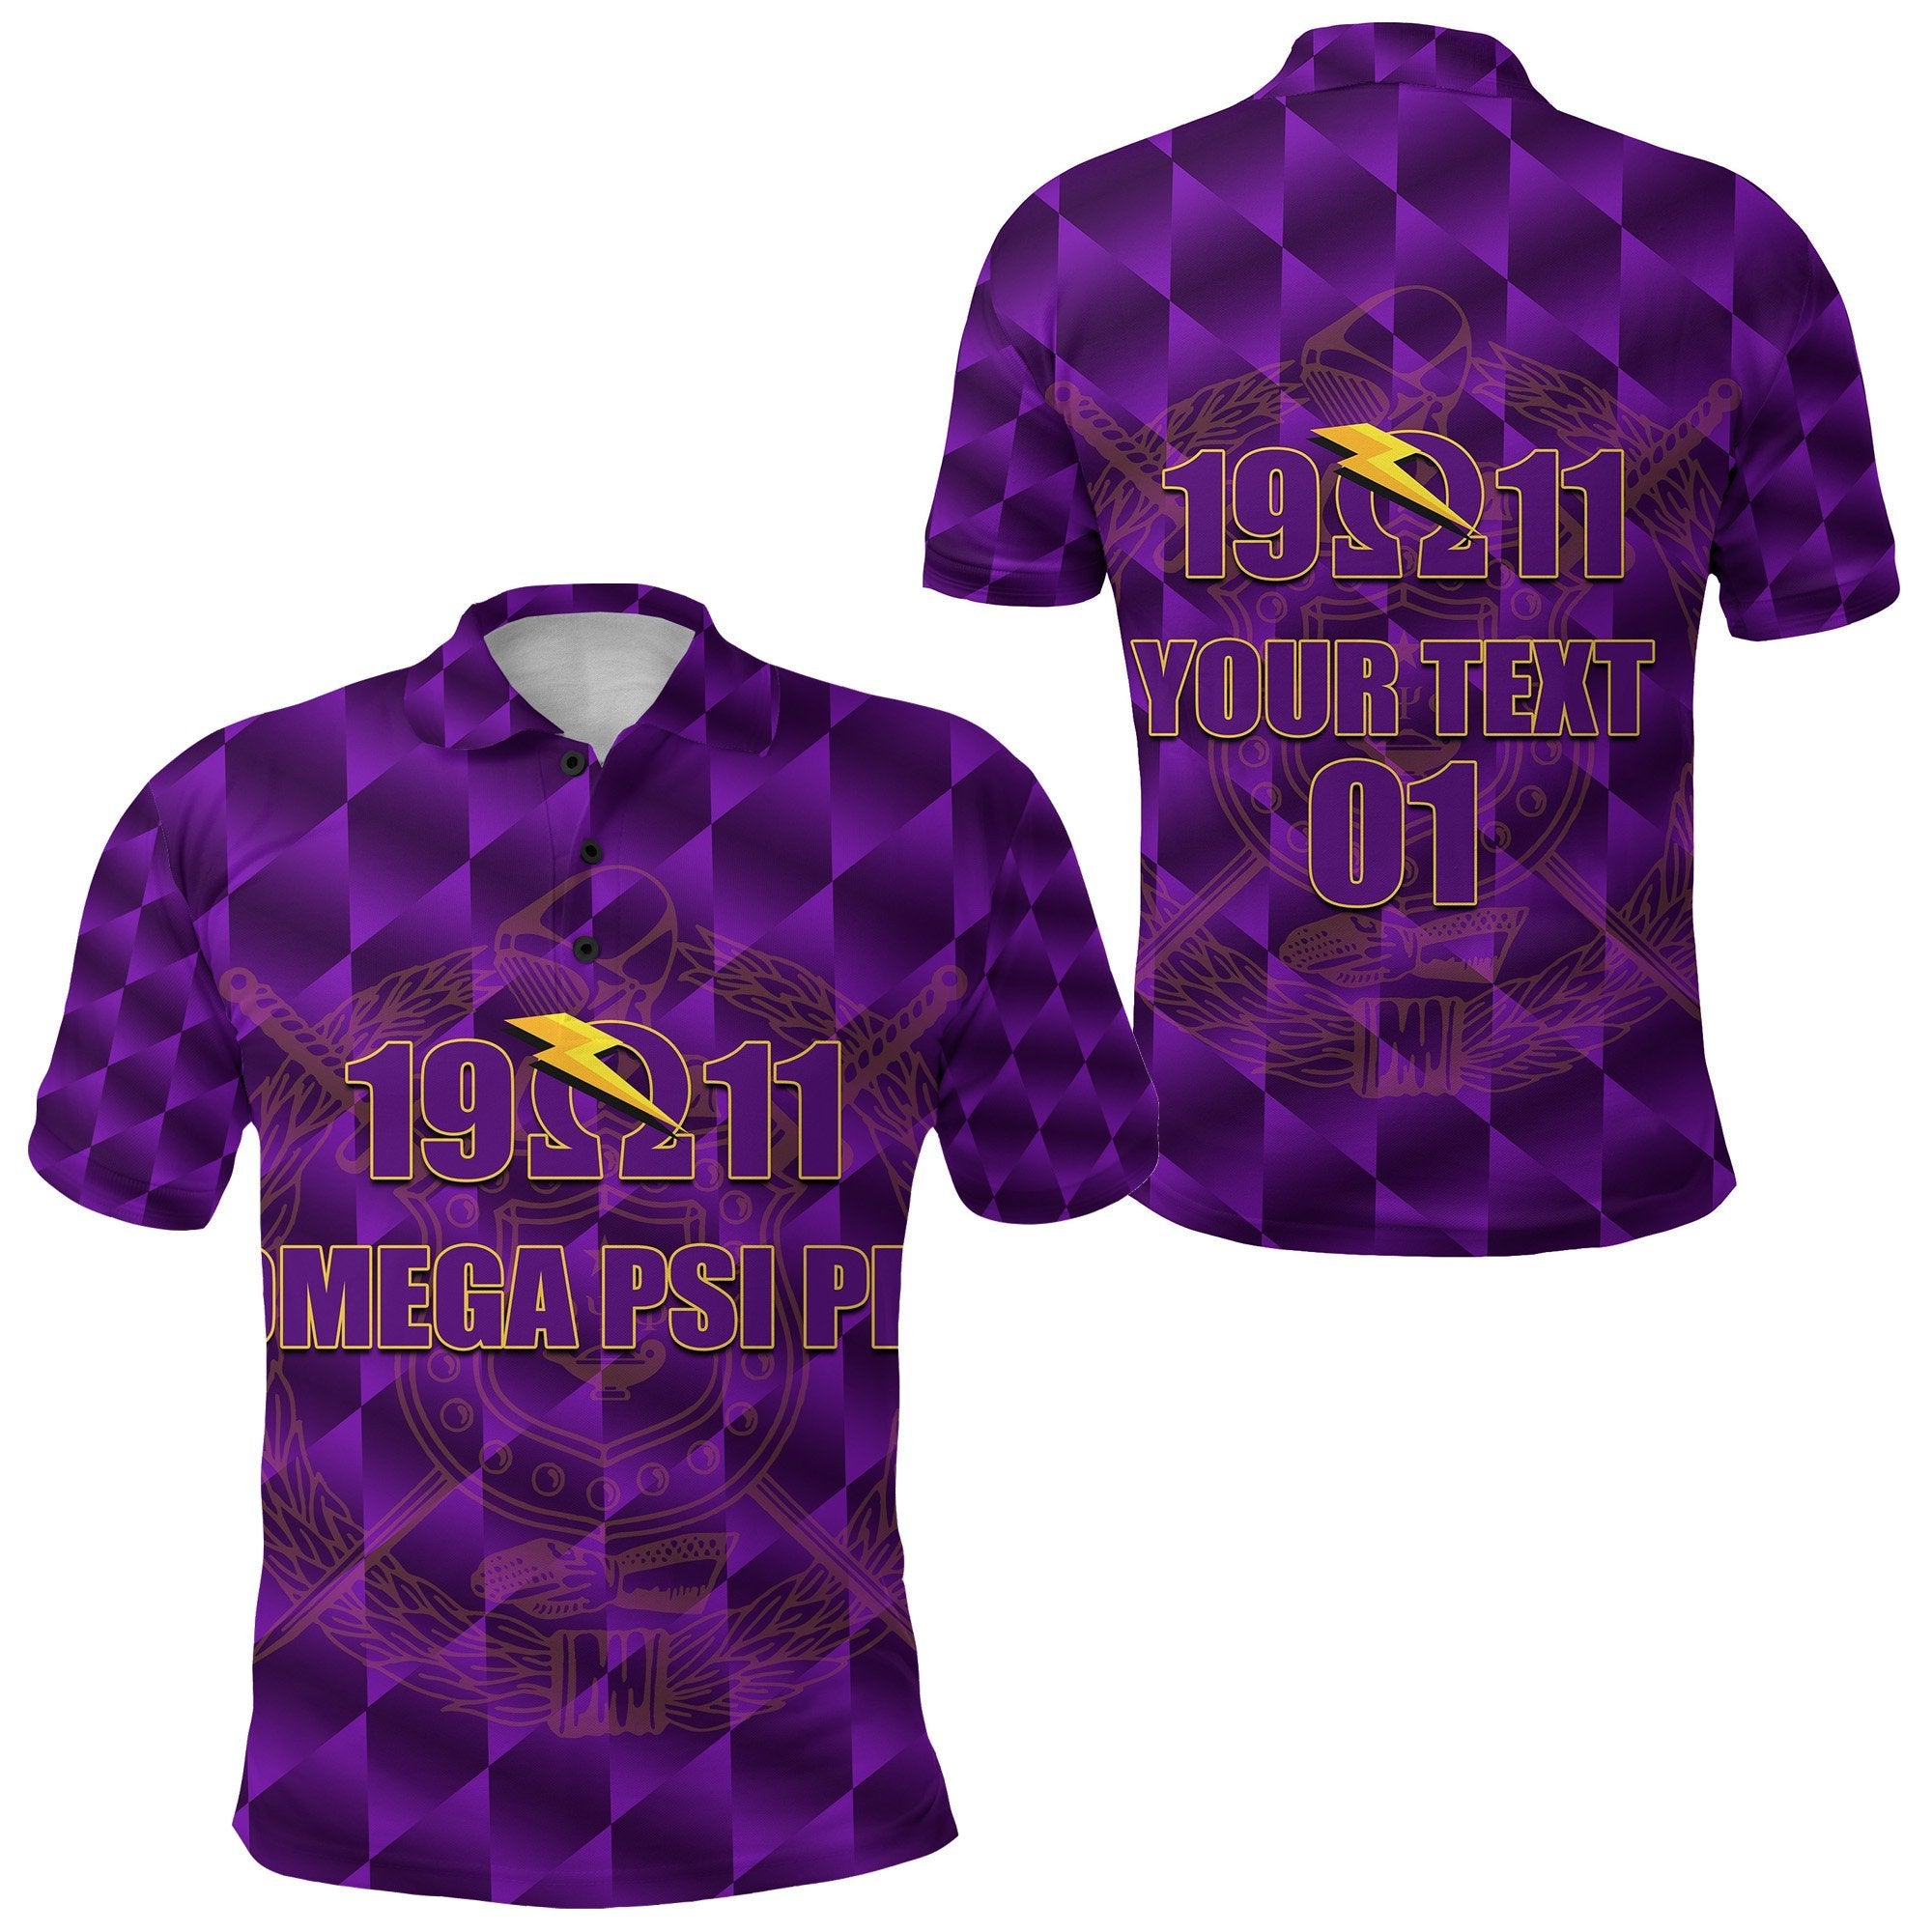 (Custom Personalised) Omega Psi Phi Fraternity Polo Shirt 1911 Still Omega, Custom Text And Number Lt8